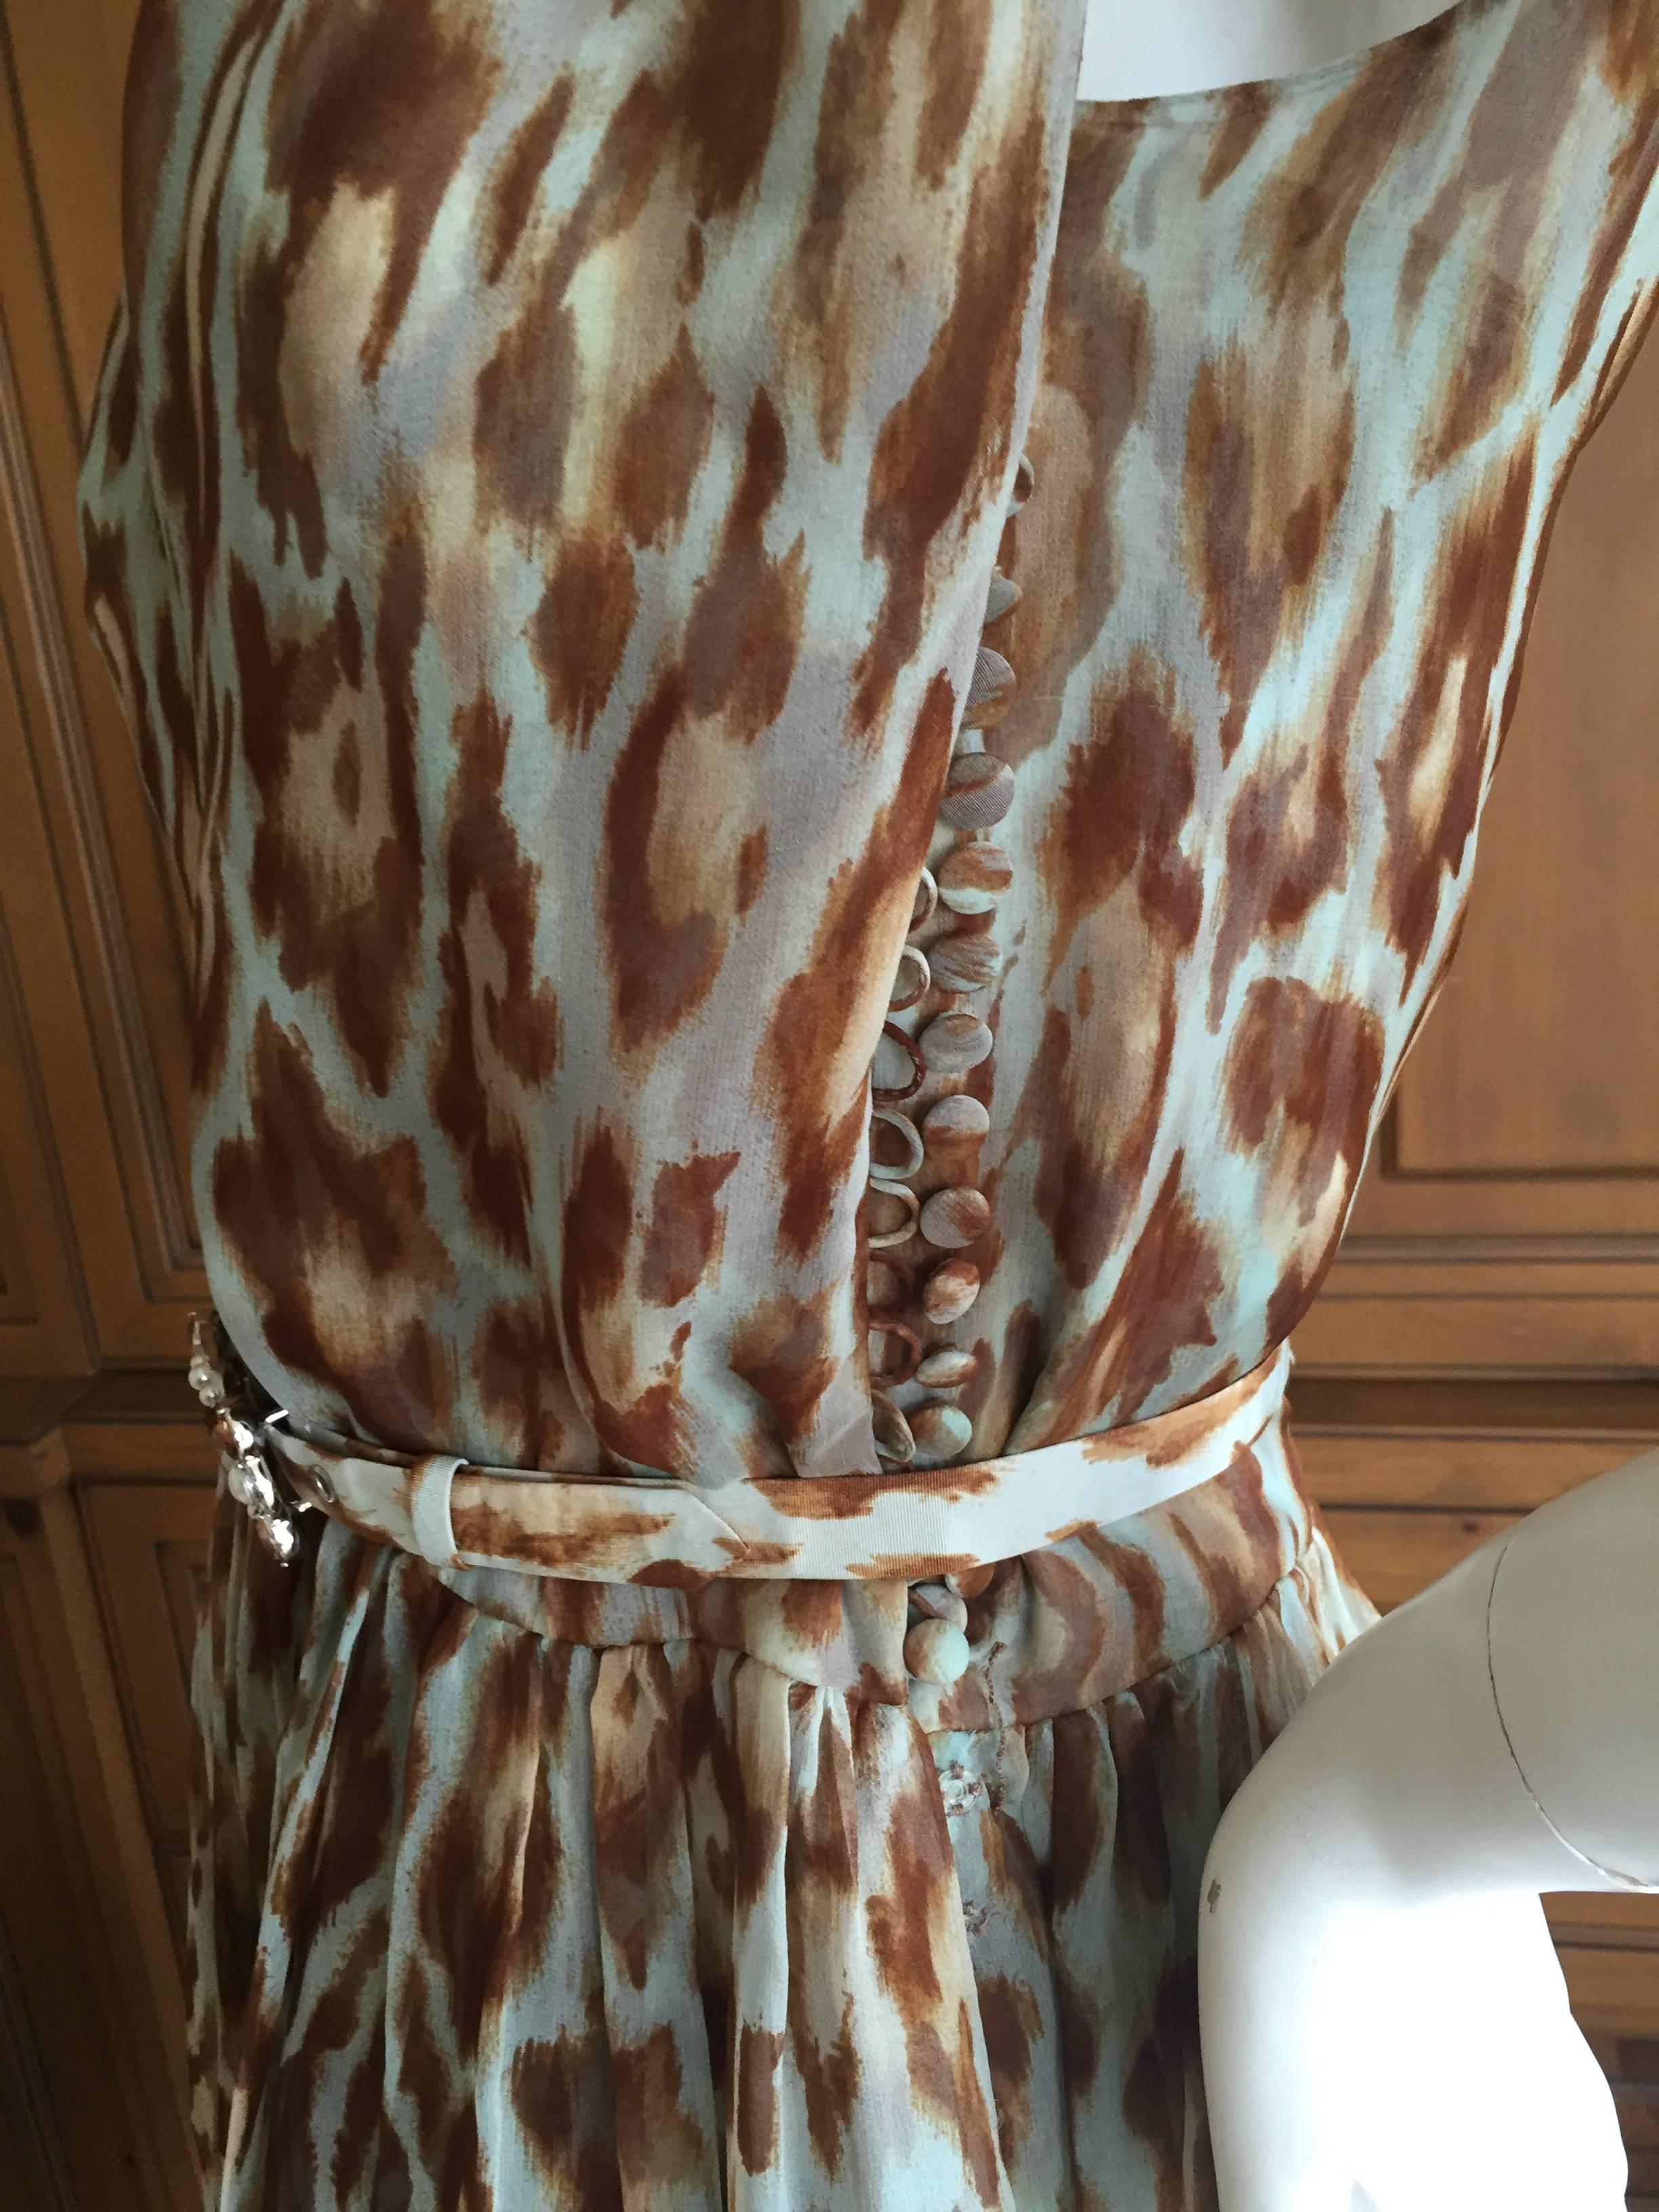 Christian Dior Galliano Chic One Shoulder Leopard Print Silk Dress w Jewel Belt  In Excellent Condition For Sale In Cloverdale, CA